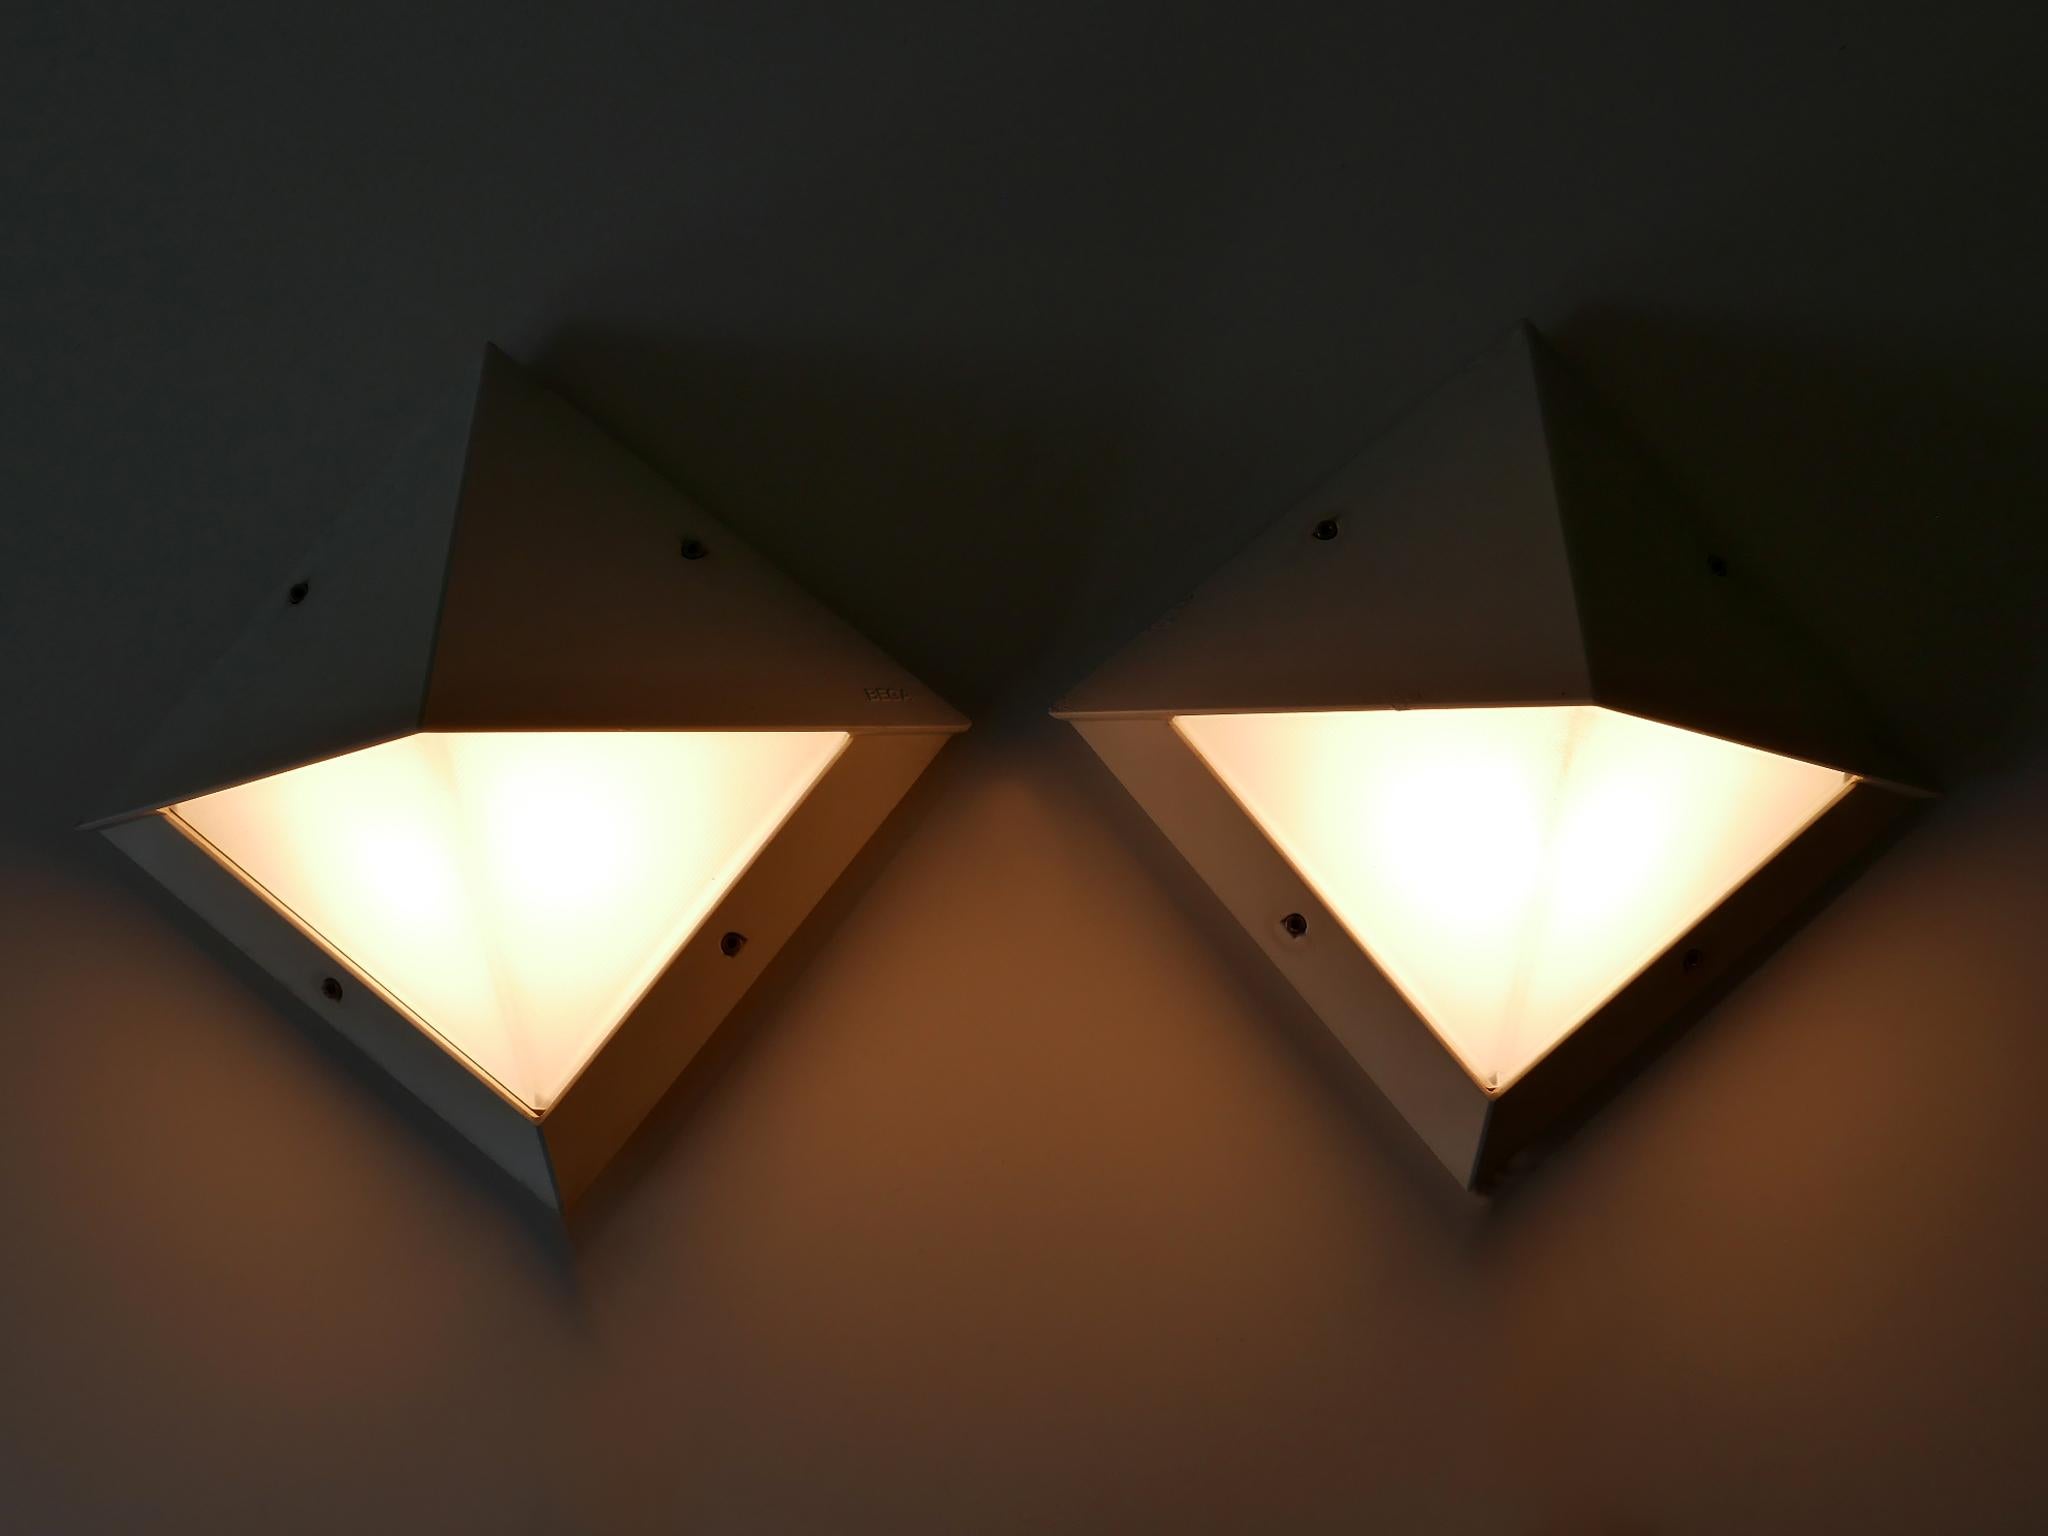 Enameled Set of Two Medium Outdoor Wall Lamps or Sconces by BEGA, 1980s, Germany For Sale